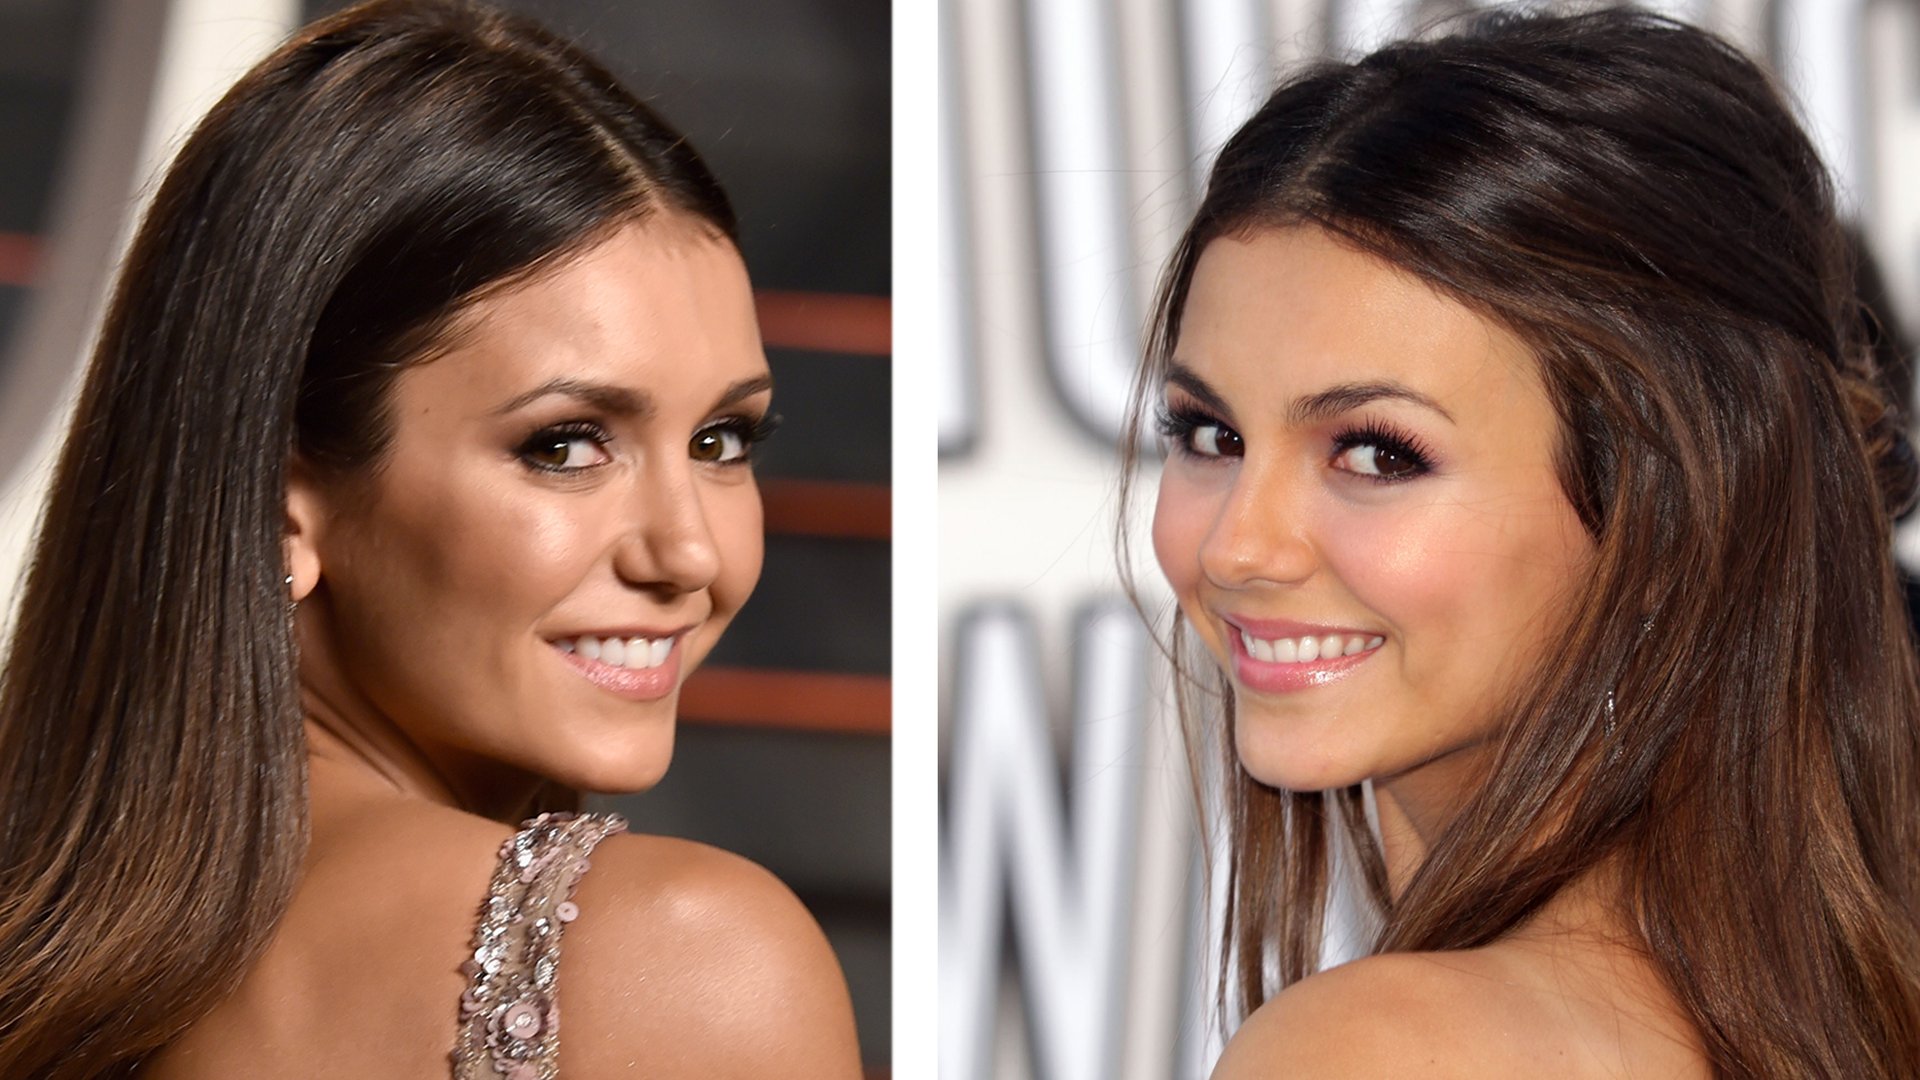 The actress has been rumored to replace dobrev's role for quite a whil...